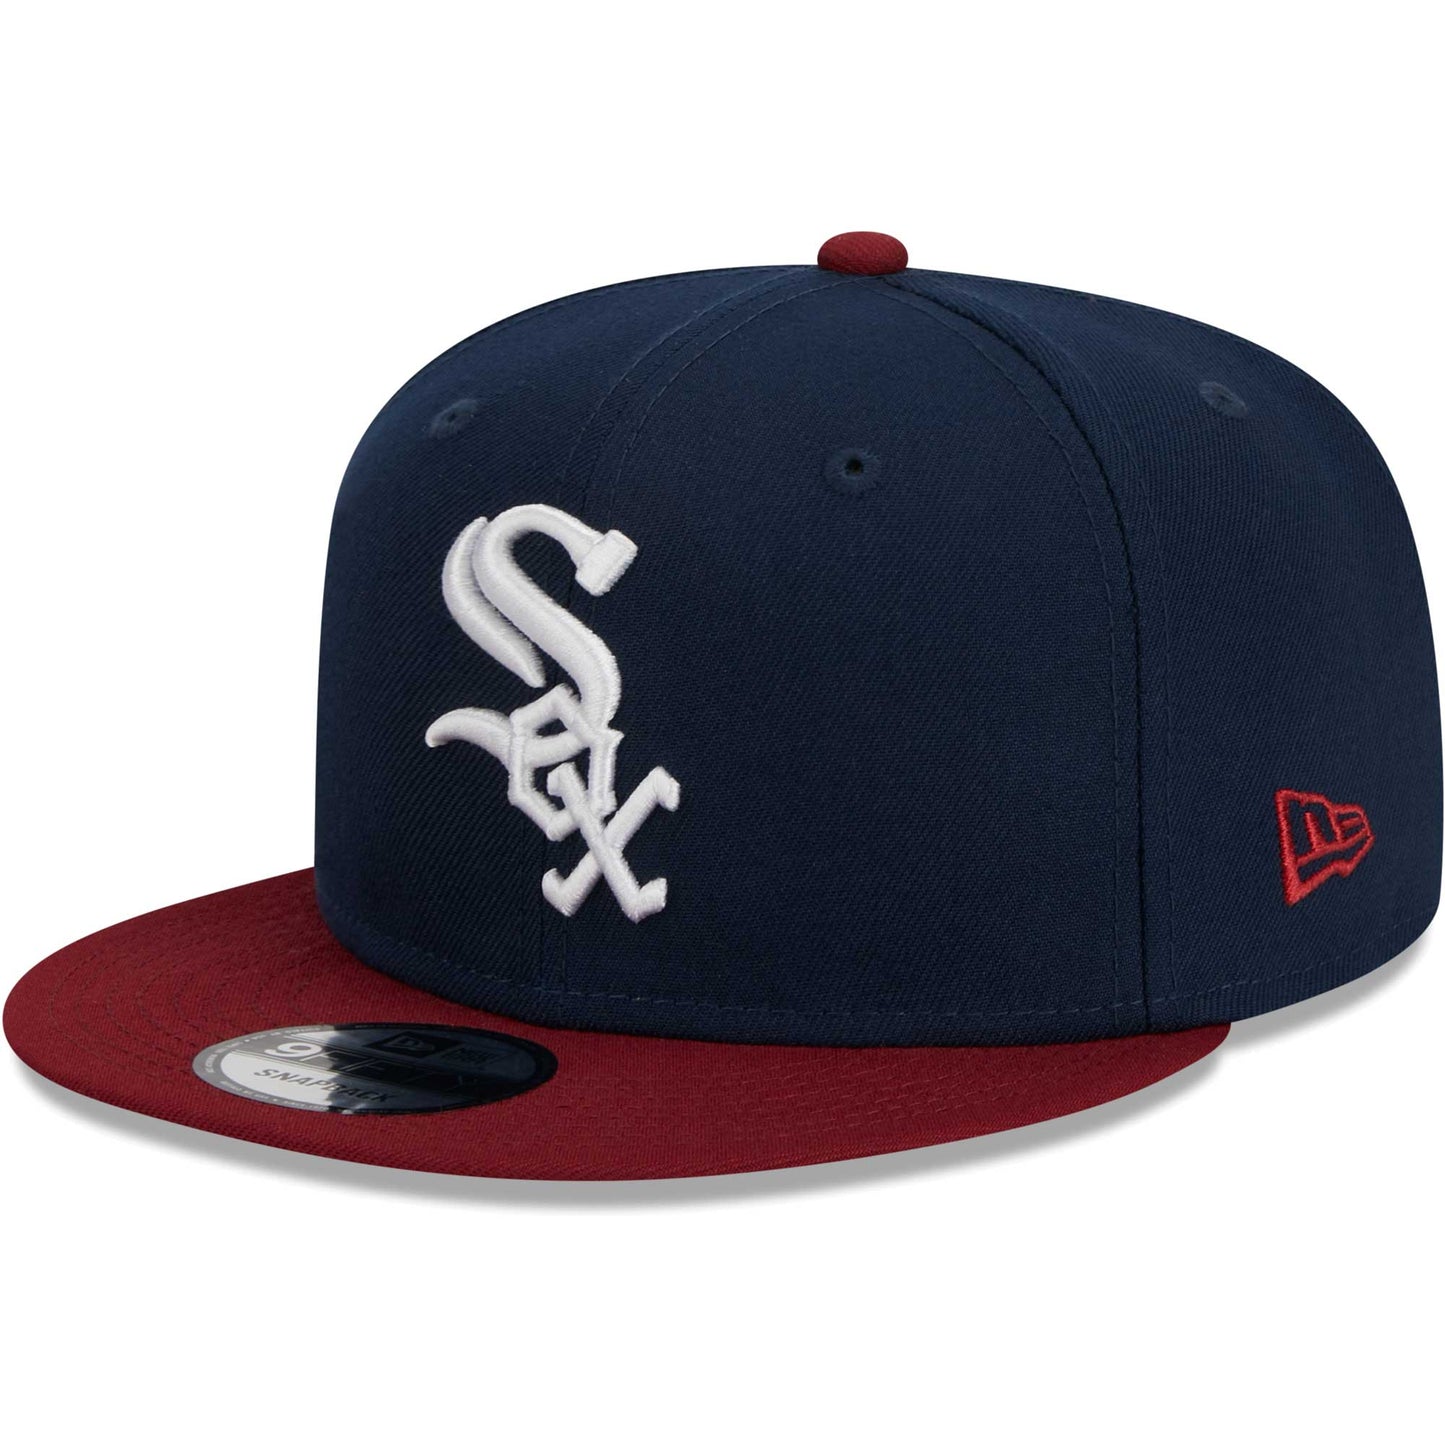 Chicago White Sox New Era Two-Tone Color Pack 9FIFTY Snapback Hat - Navy